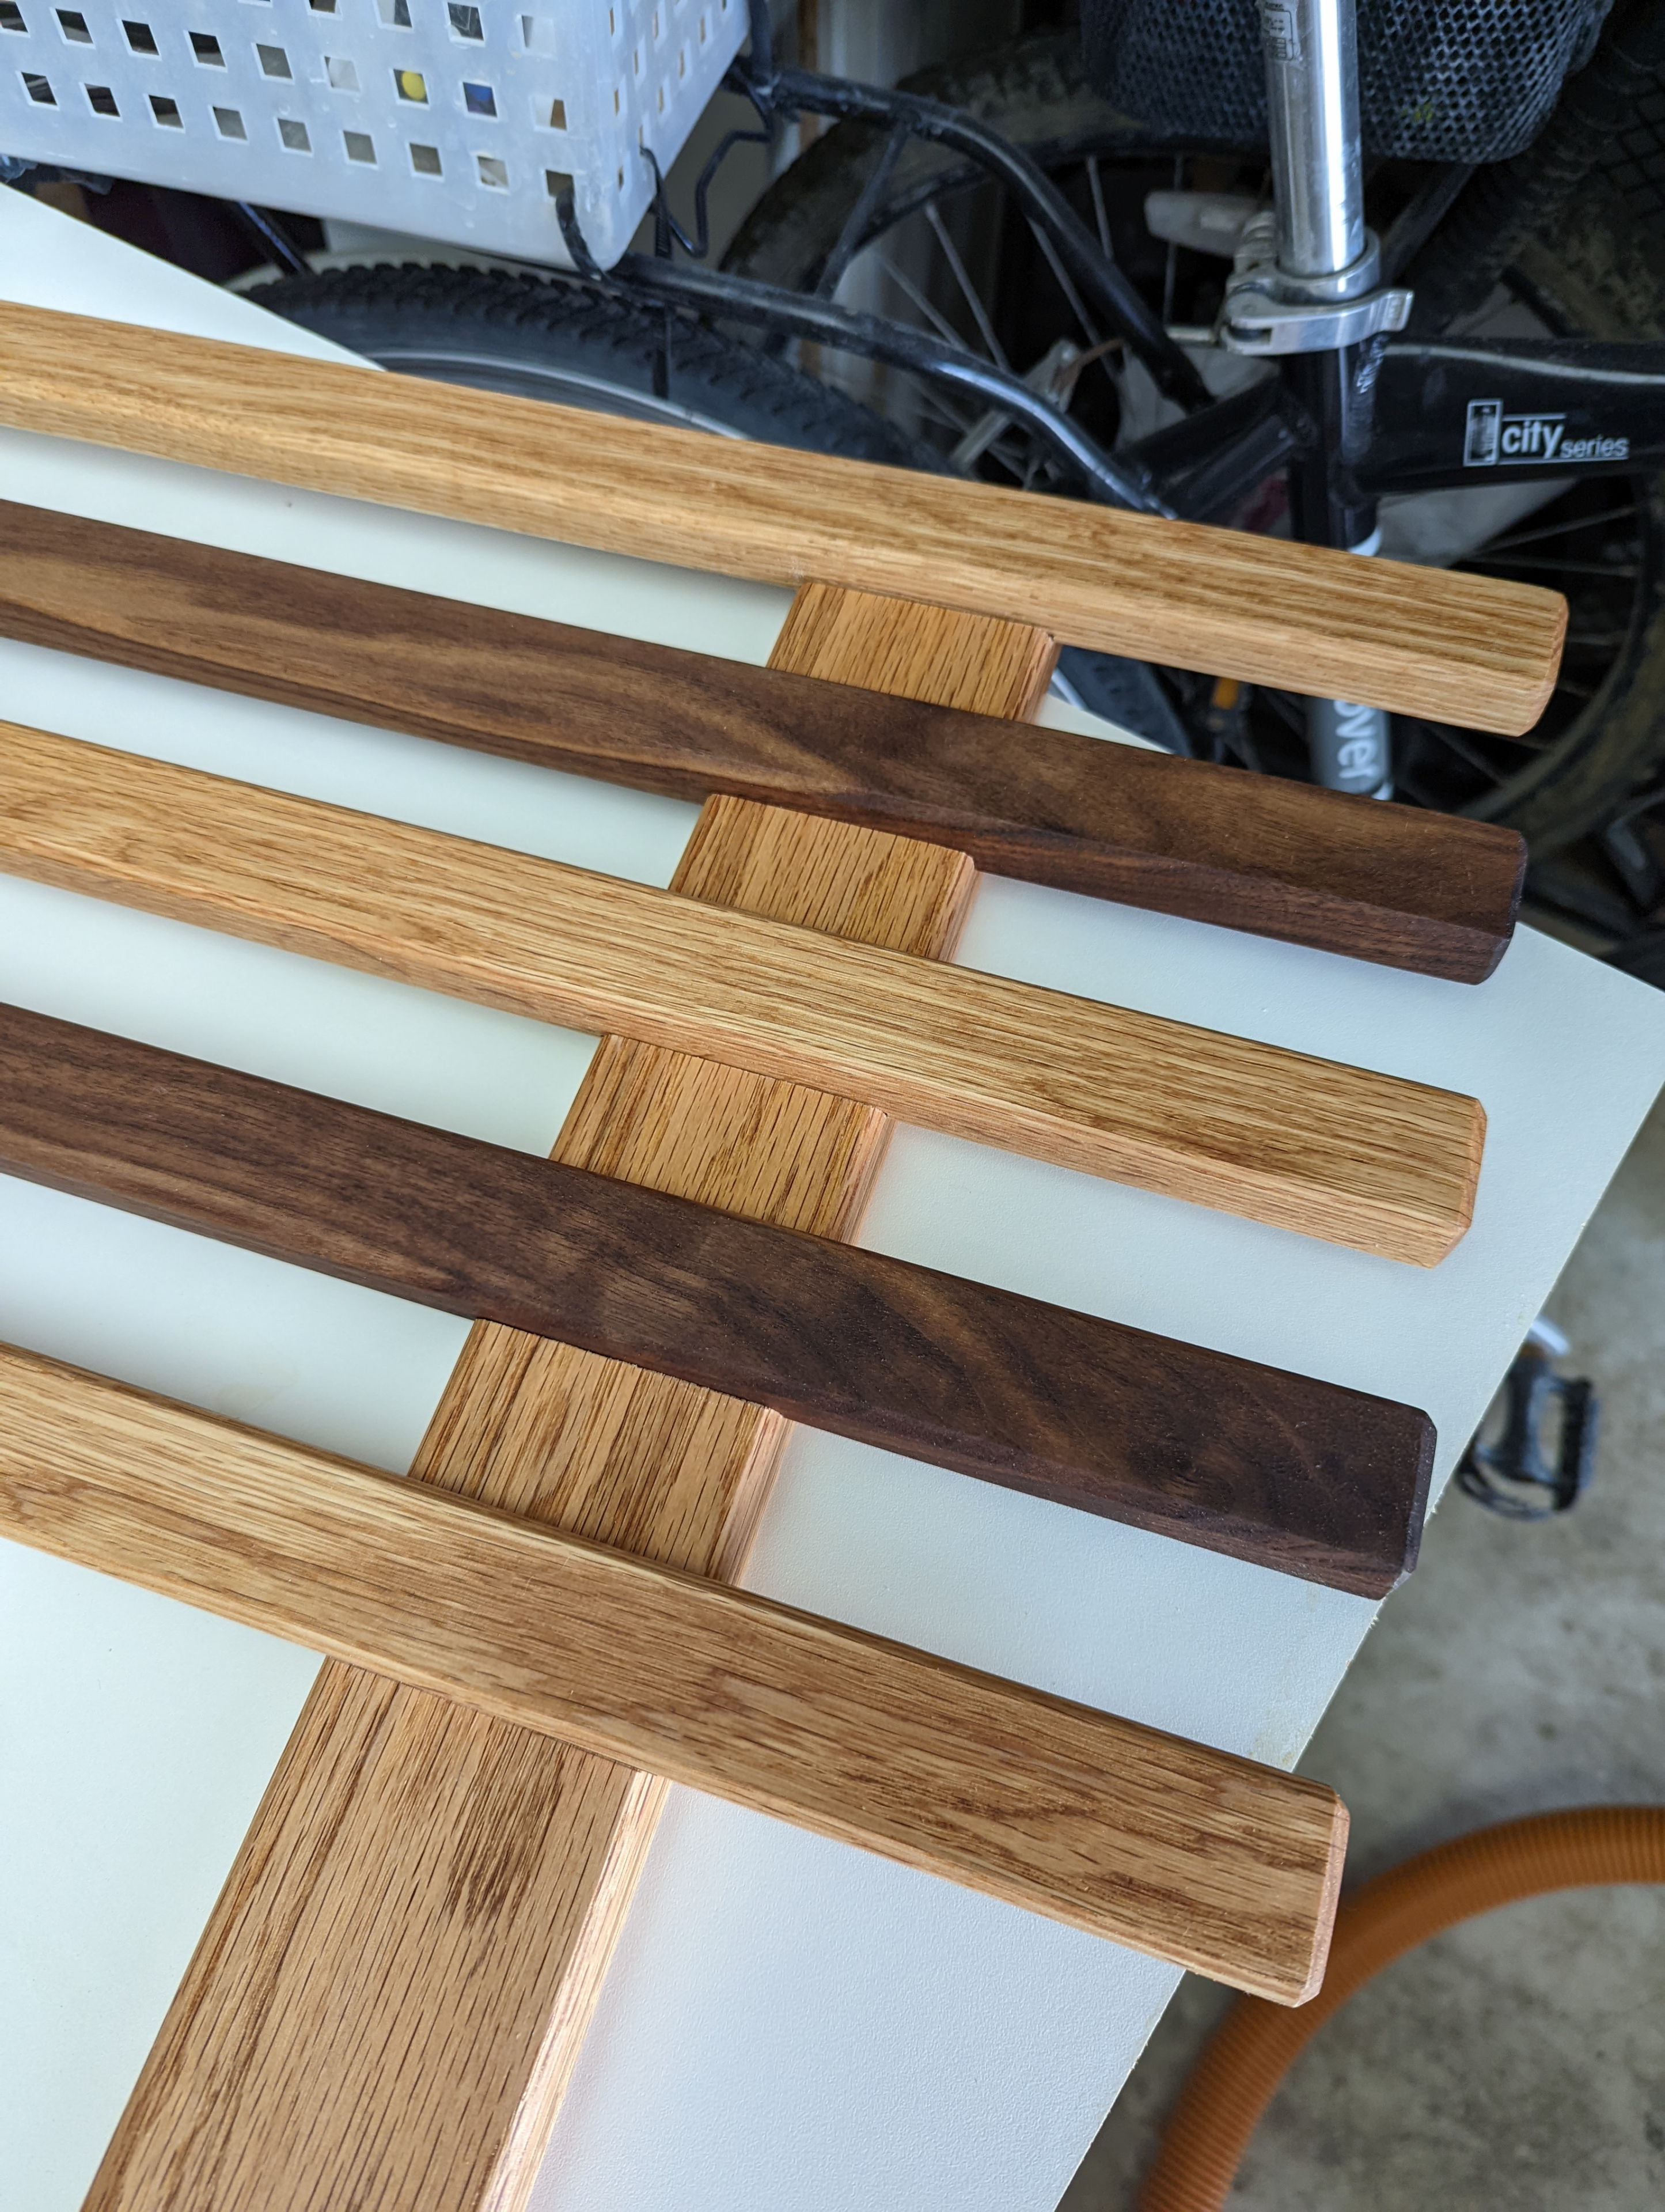 I built the headboard out of a grid of boards with interlocking recesses cut using a cross cut sled and many shallow passes on the table saw, then glued together. This ended up looking much better than my original plan to simply screw them together.